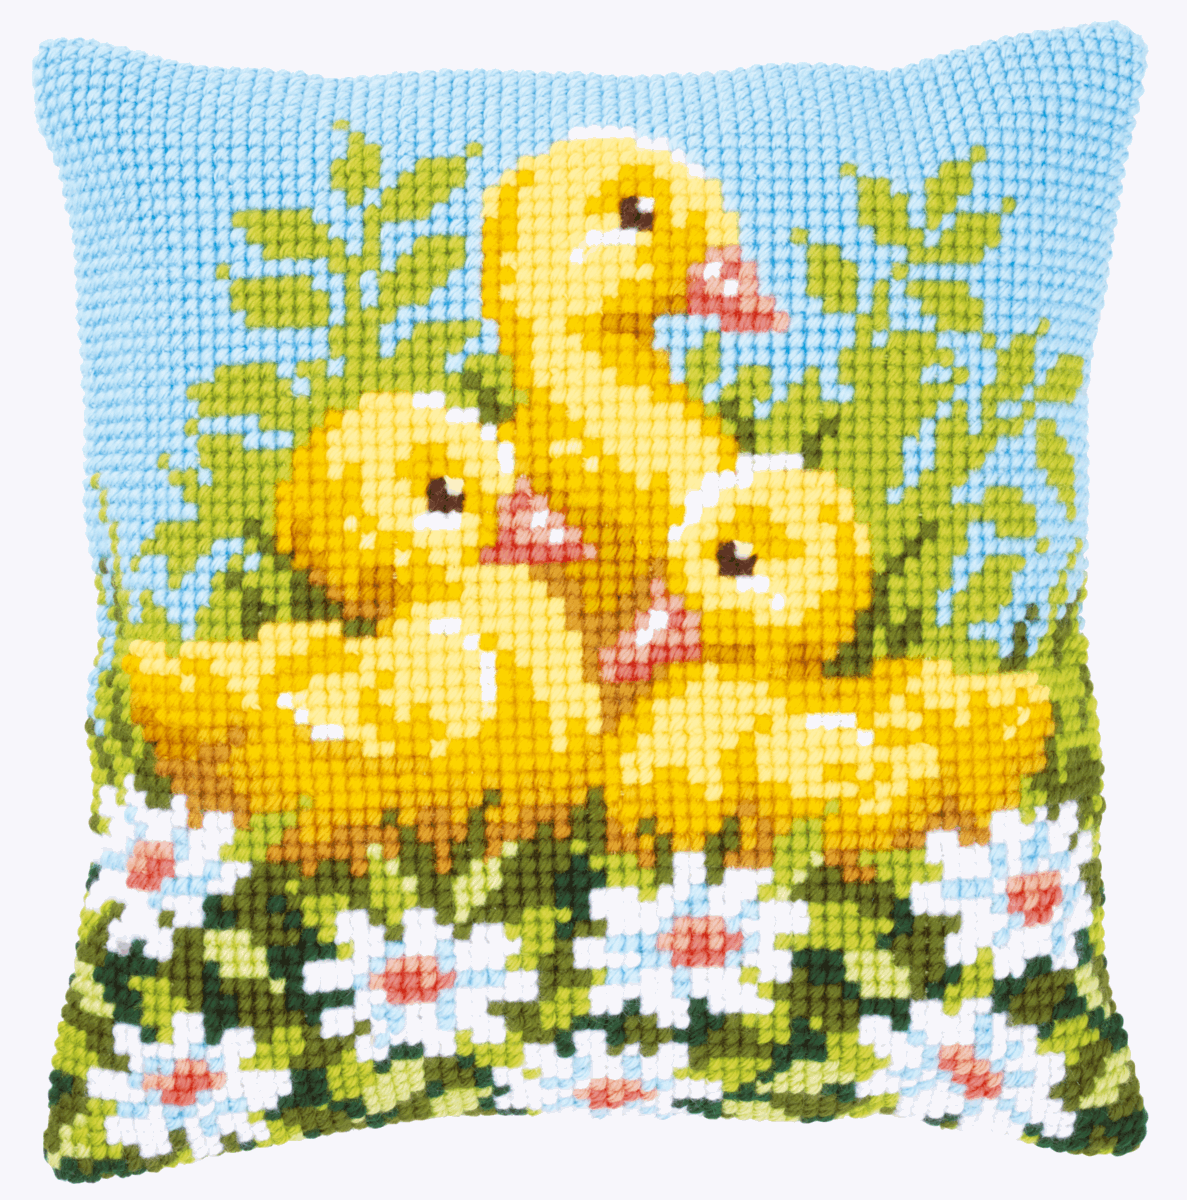 Ducklings With Daisies  - Vervaco Cushion Cross Stitch Kit PN-0146248